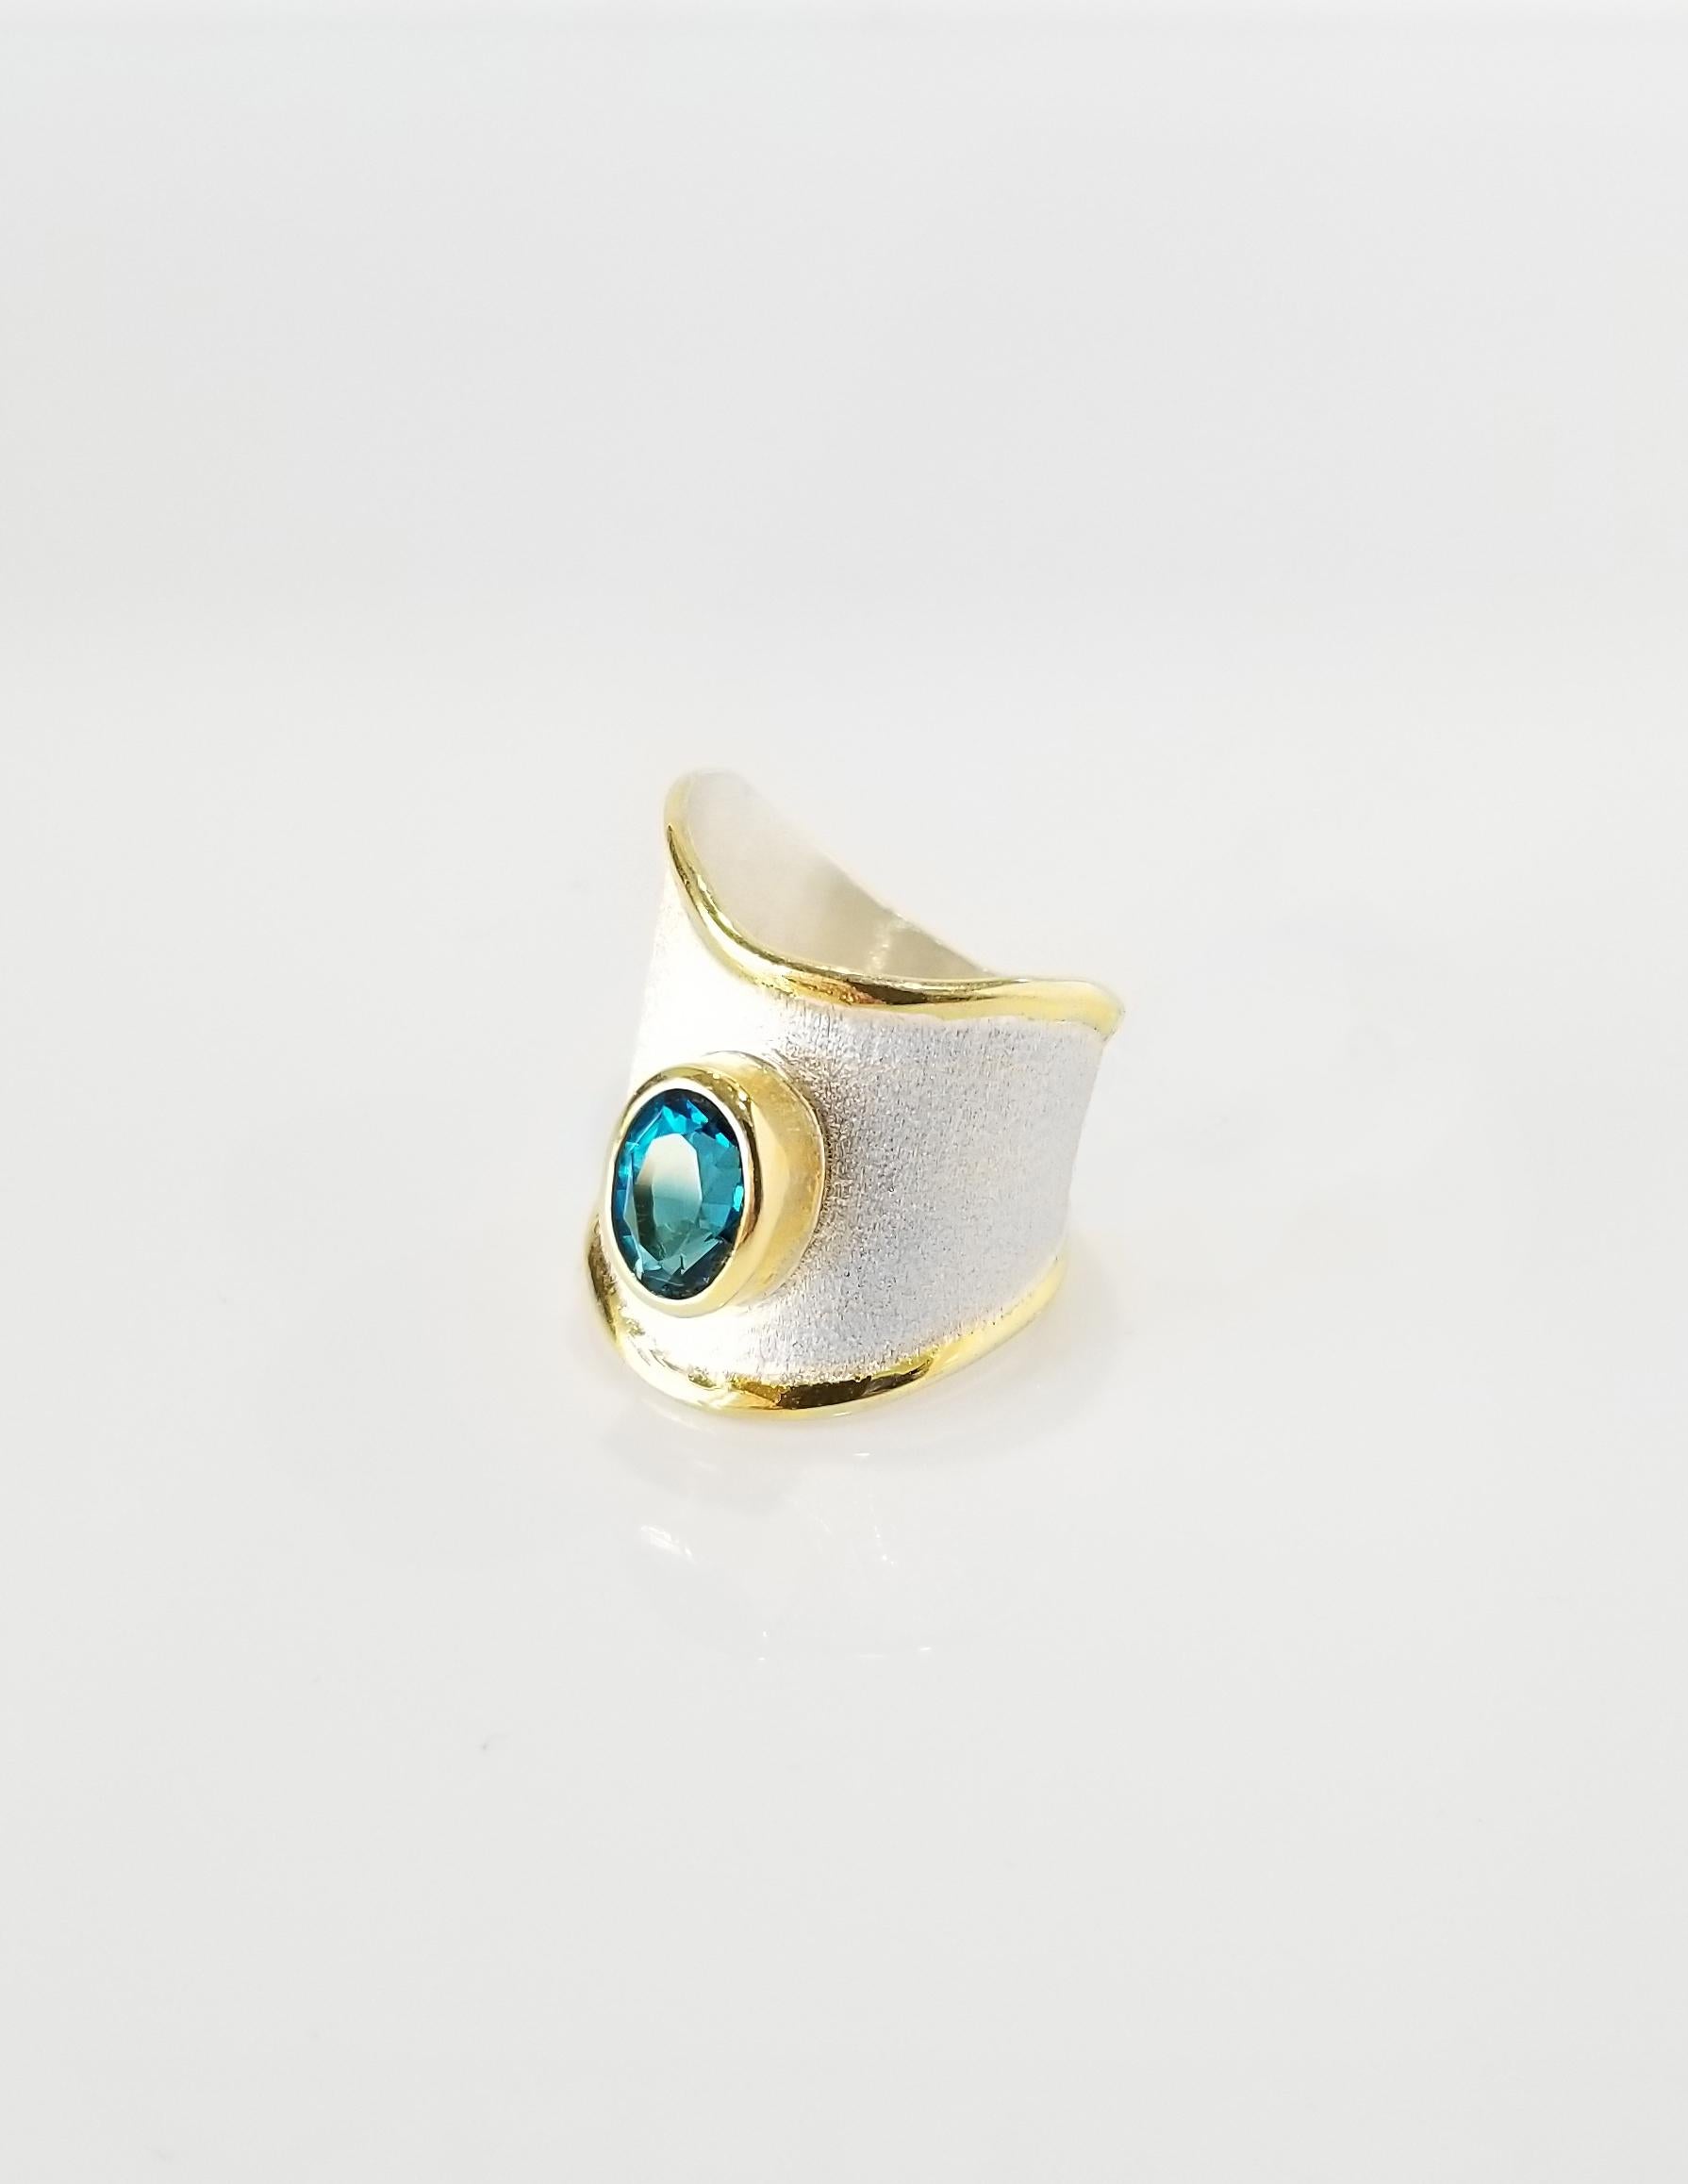 Introducing Yianni Creations Midas Collection handmade artisan ring from fine silver 950 purity plated with palladium to resist the elements. Liquid edges carry an overlay of 24 karats yellow gold contrasting with a brushed texture of the surface.